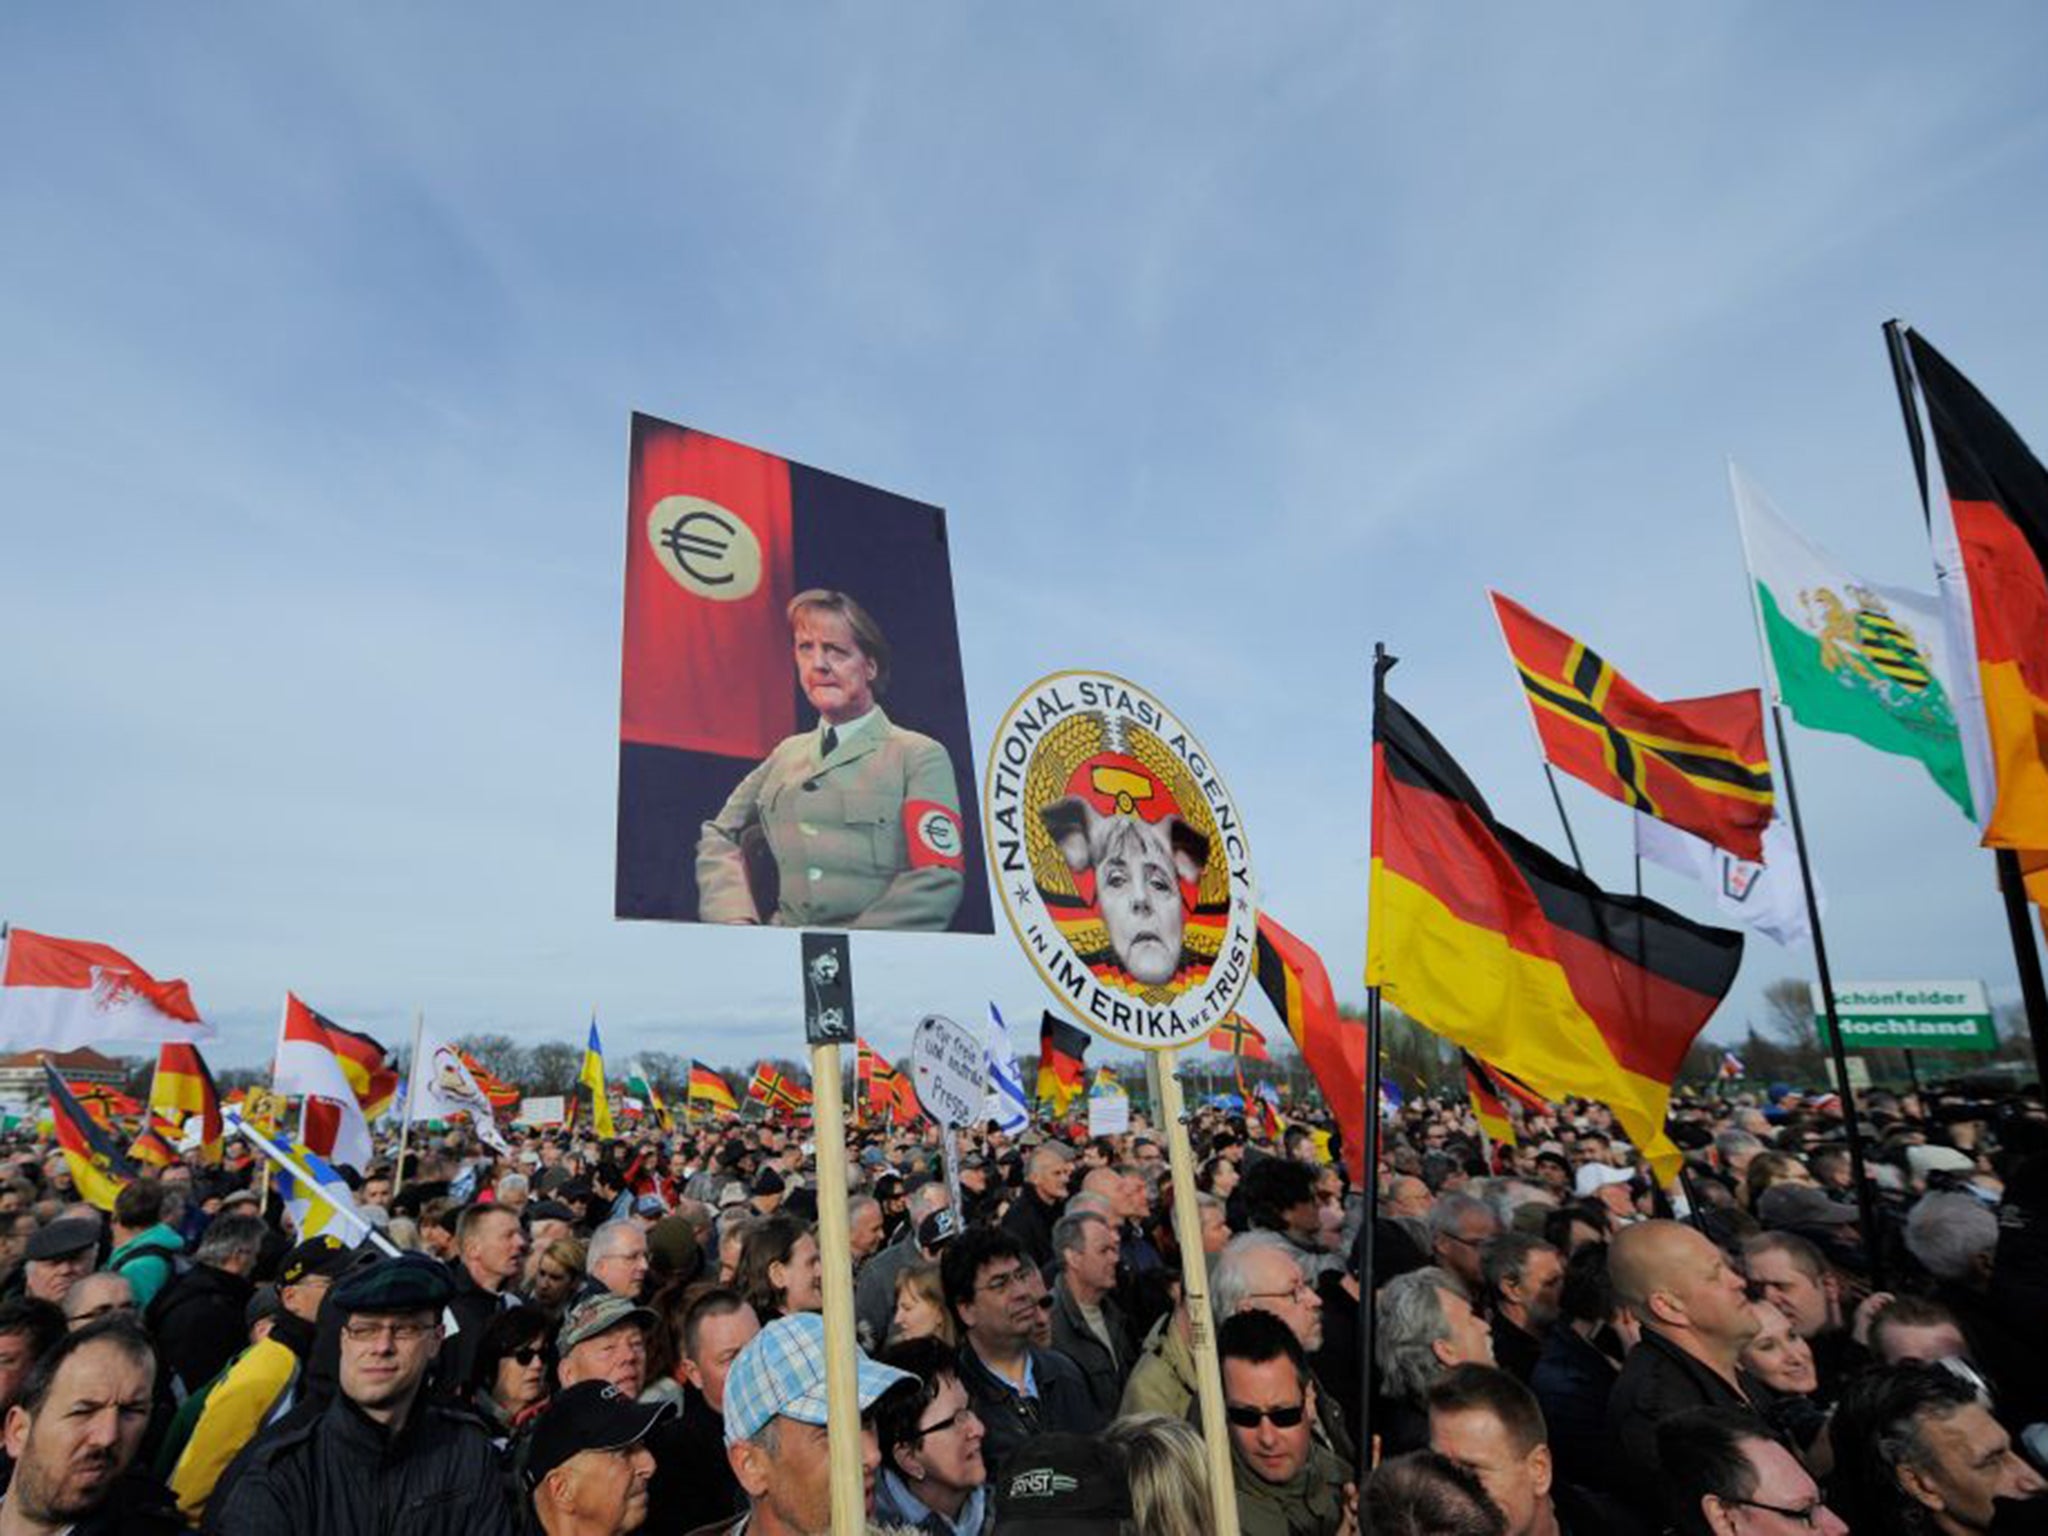 The Pegida movement has staged mass demonstrations, one of which attracted up to 20,000 people in Dresden earlier this year